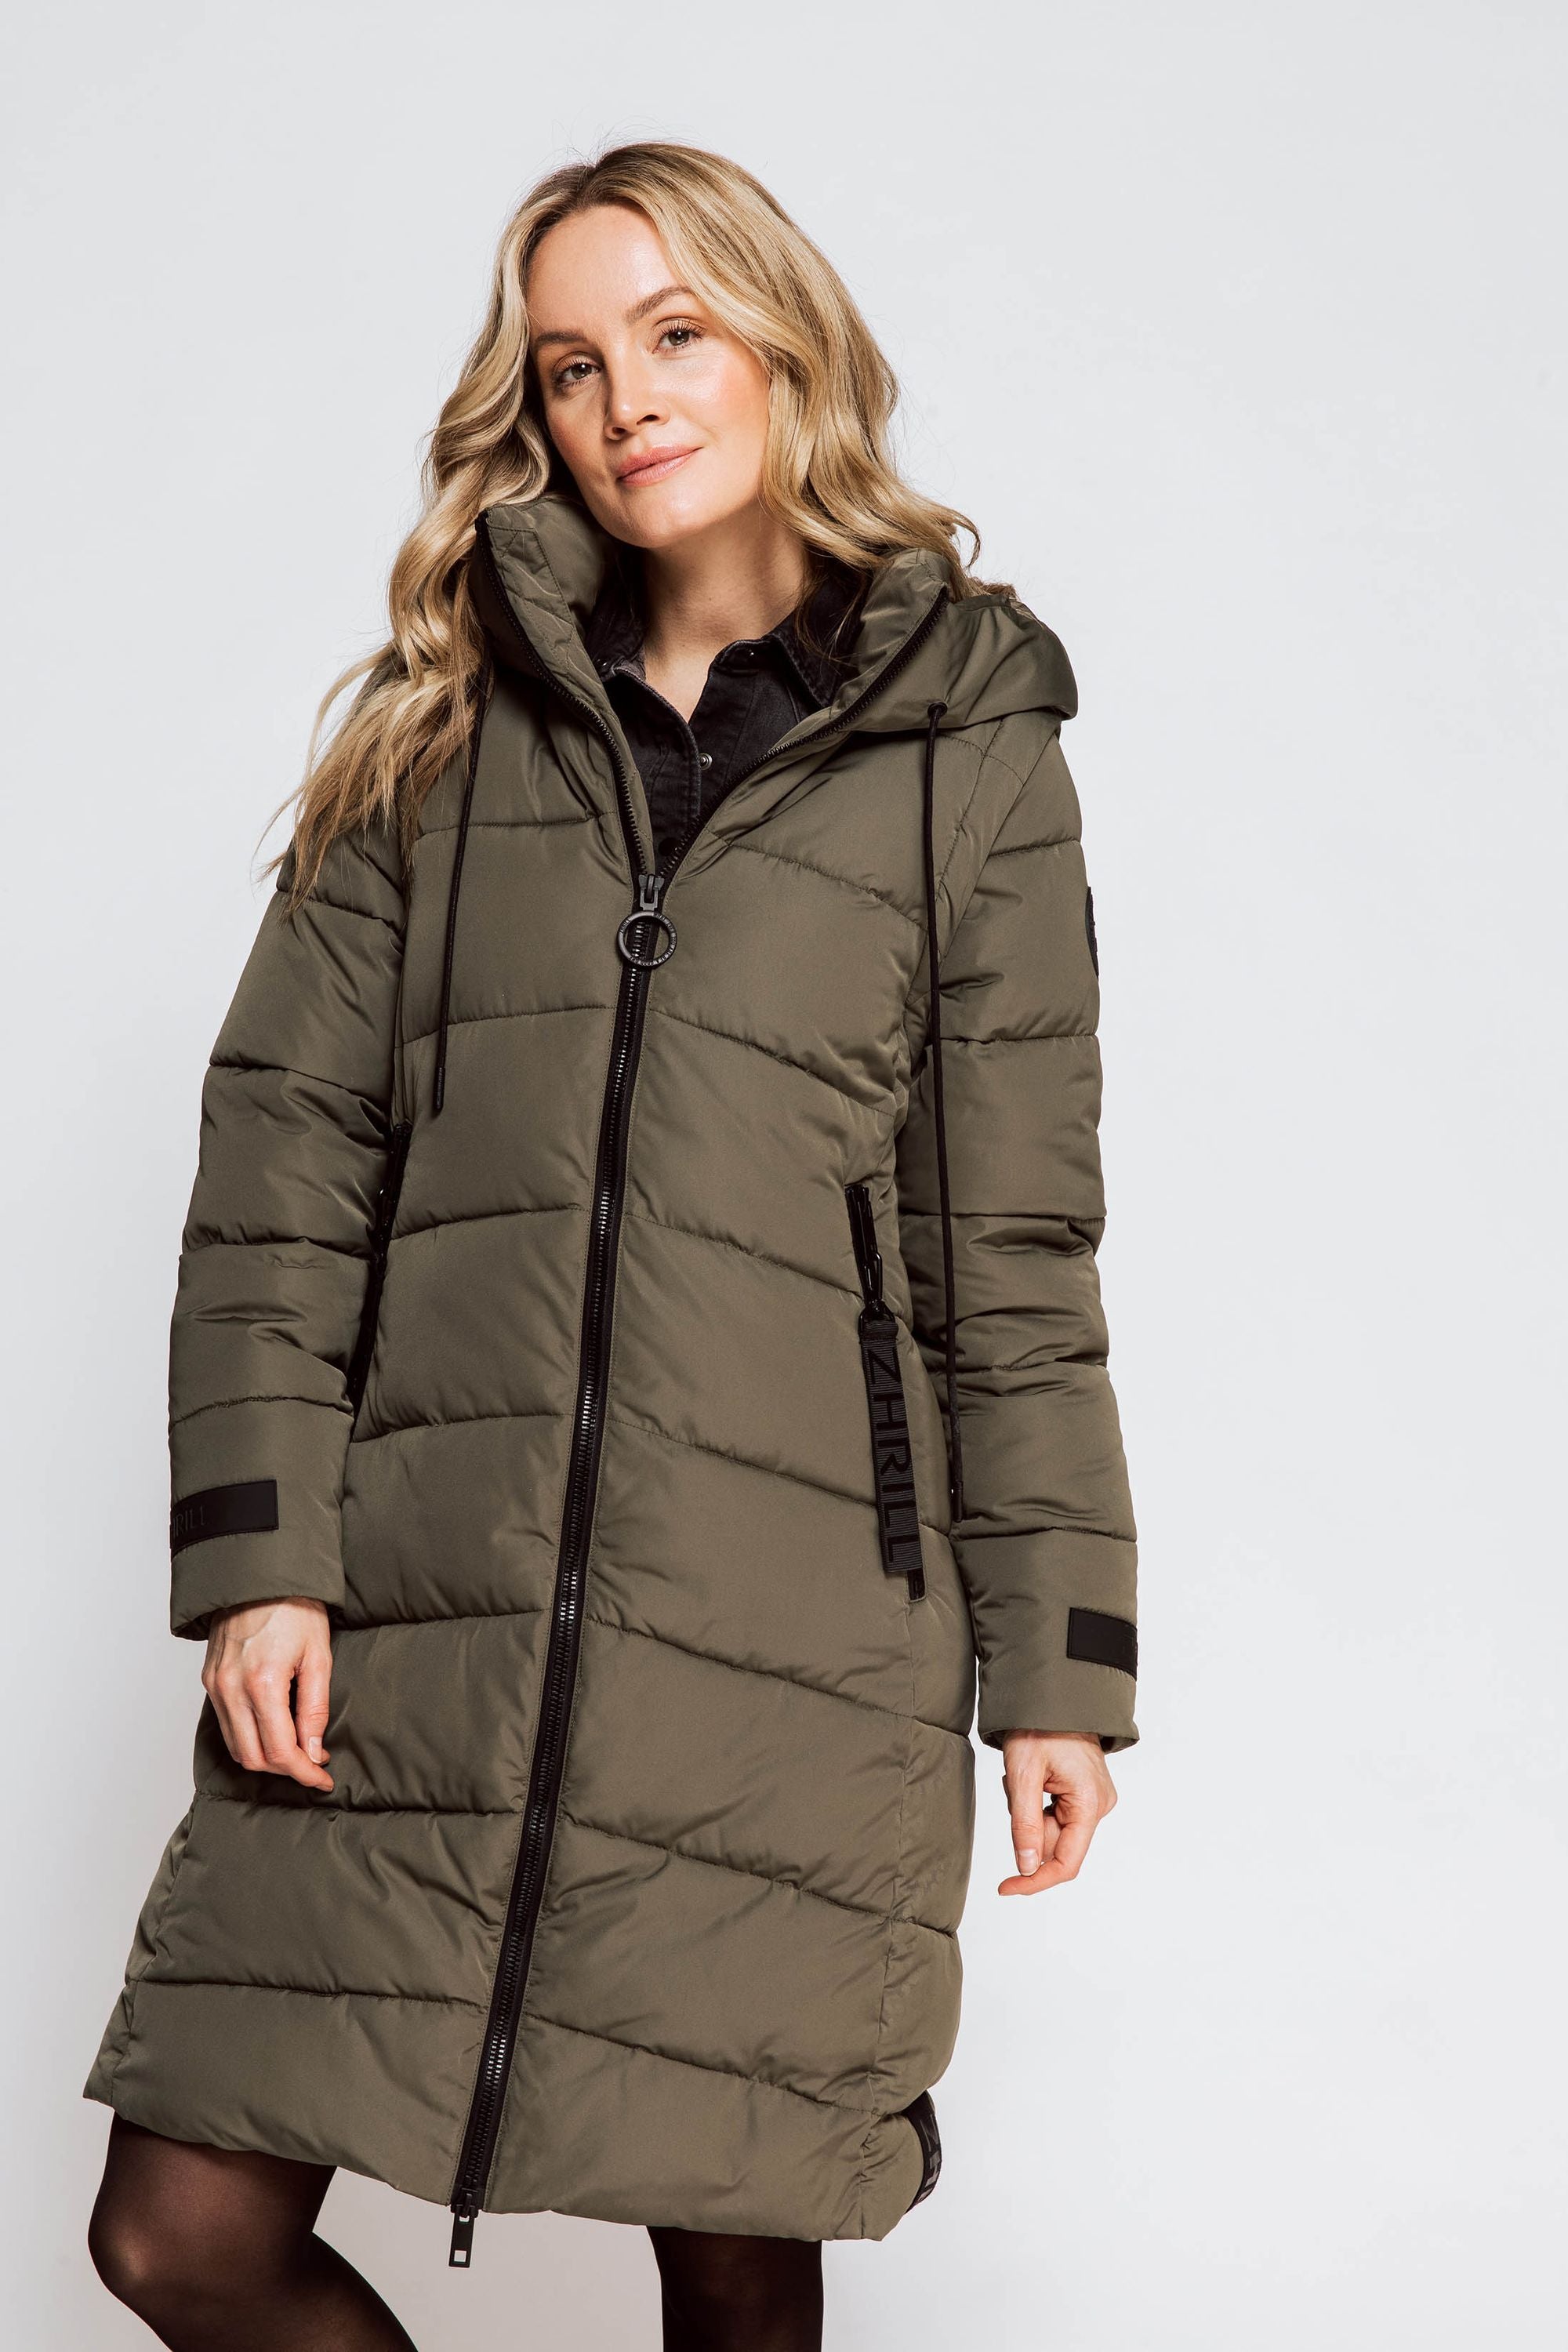 Outerwear – Shop with Julz